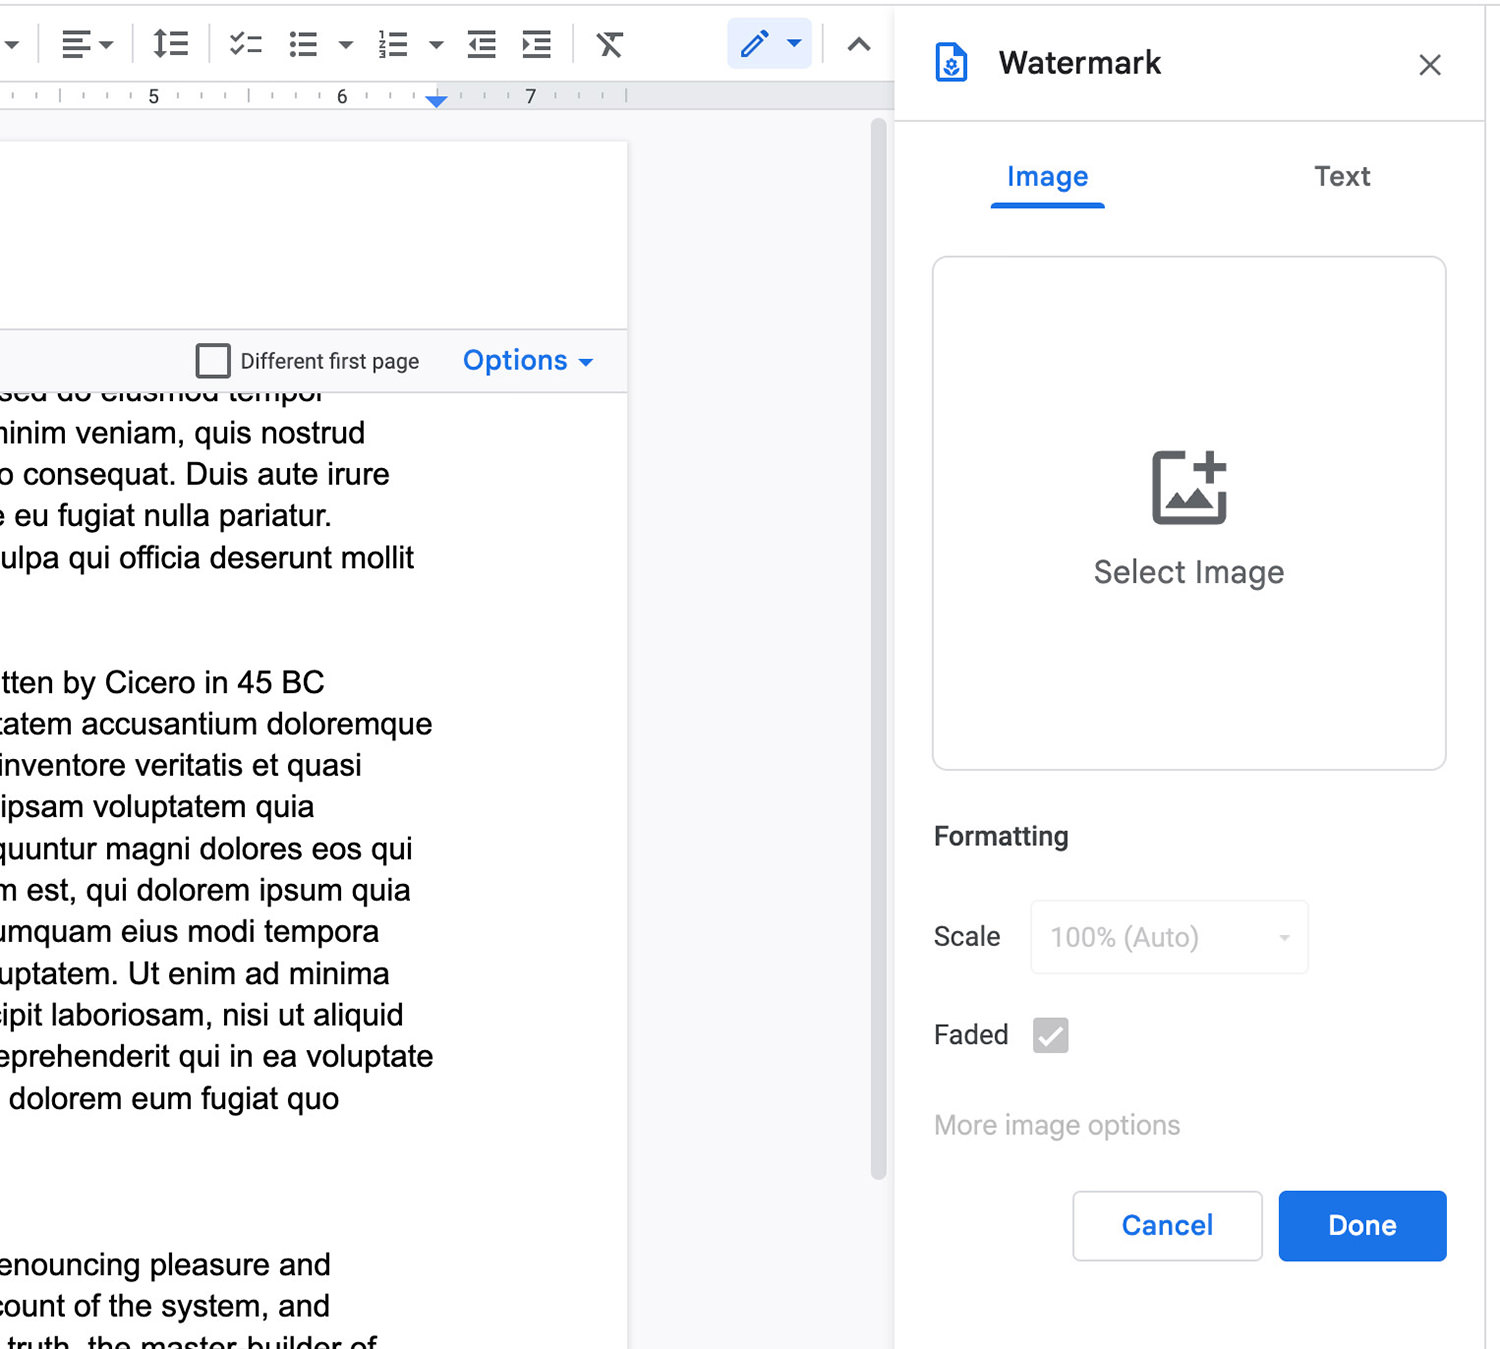 How To Add Watermarks To Google Docs